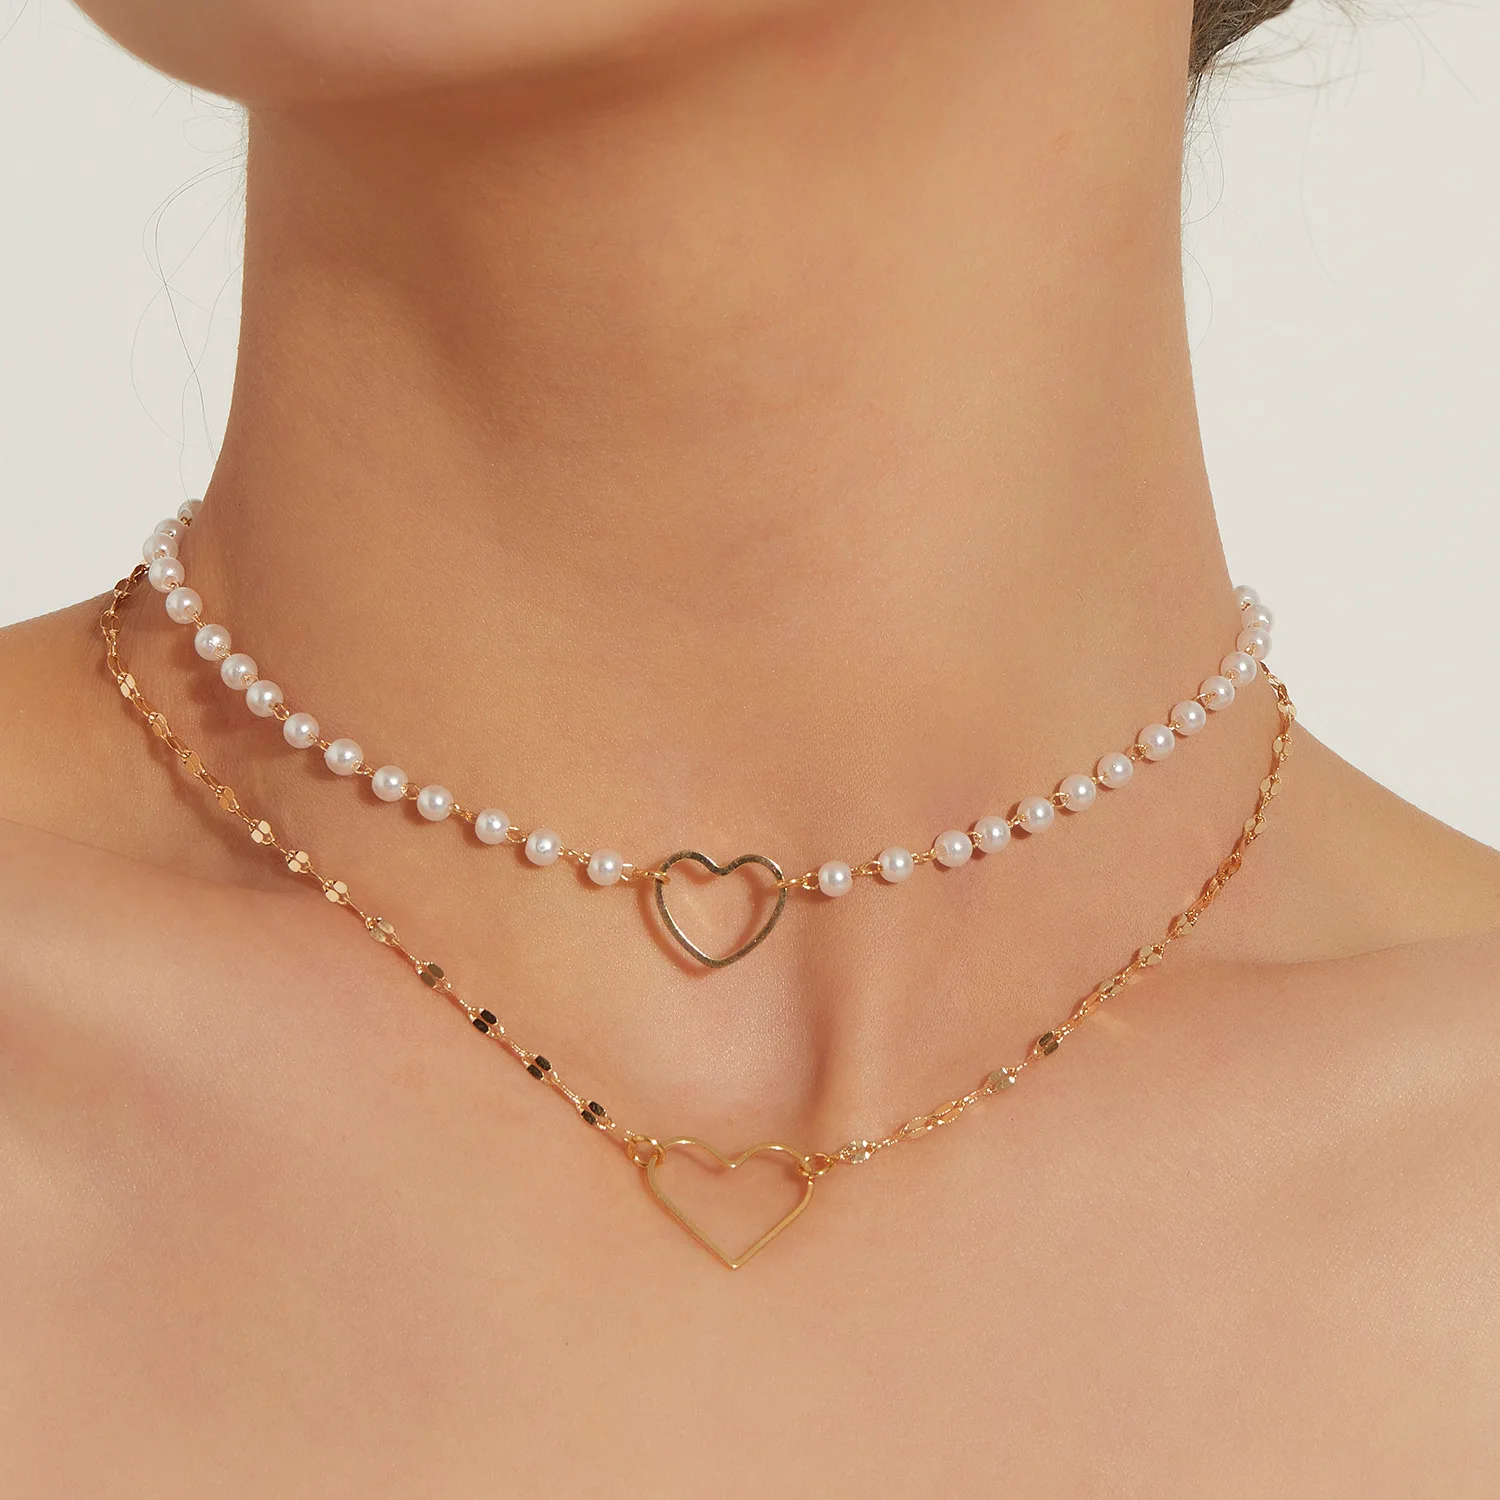 

SC Fashion Gold Choker Chain Layered Necklace Heart Beaded Pearl Necklace Delicate Gold Plated Adjustable Heart Pendant Necklace